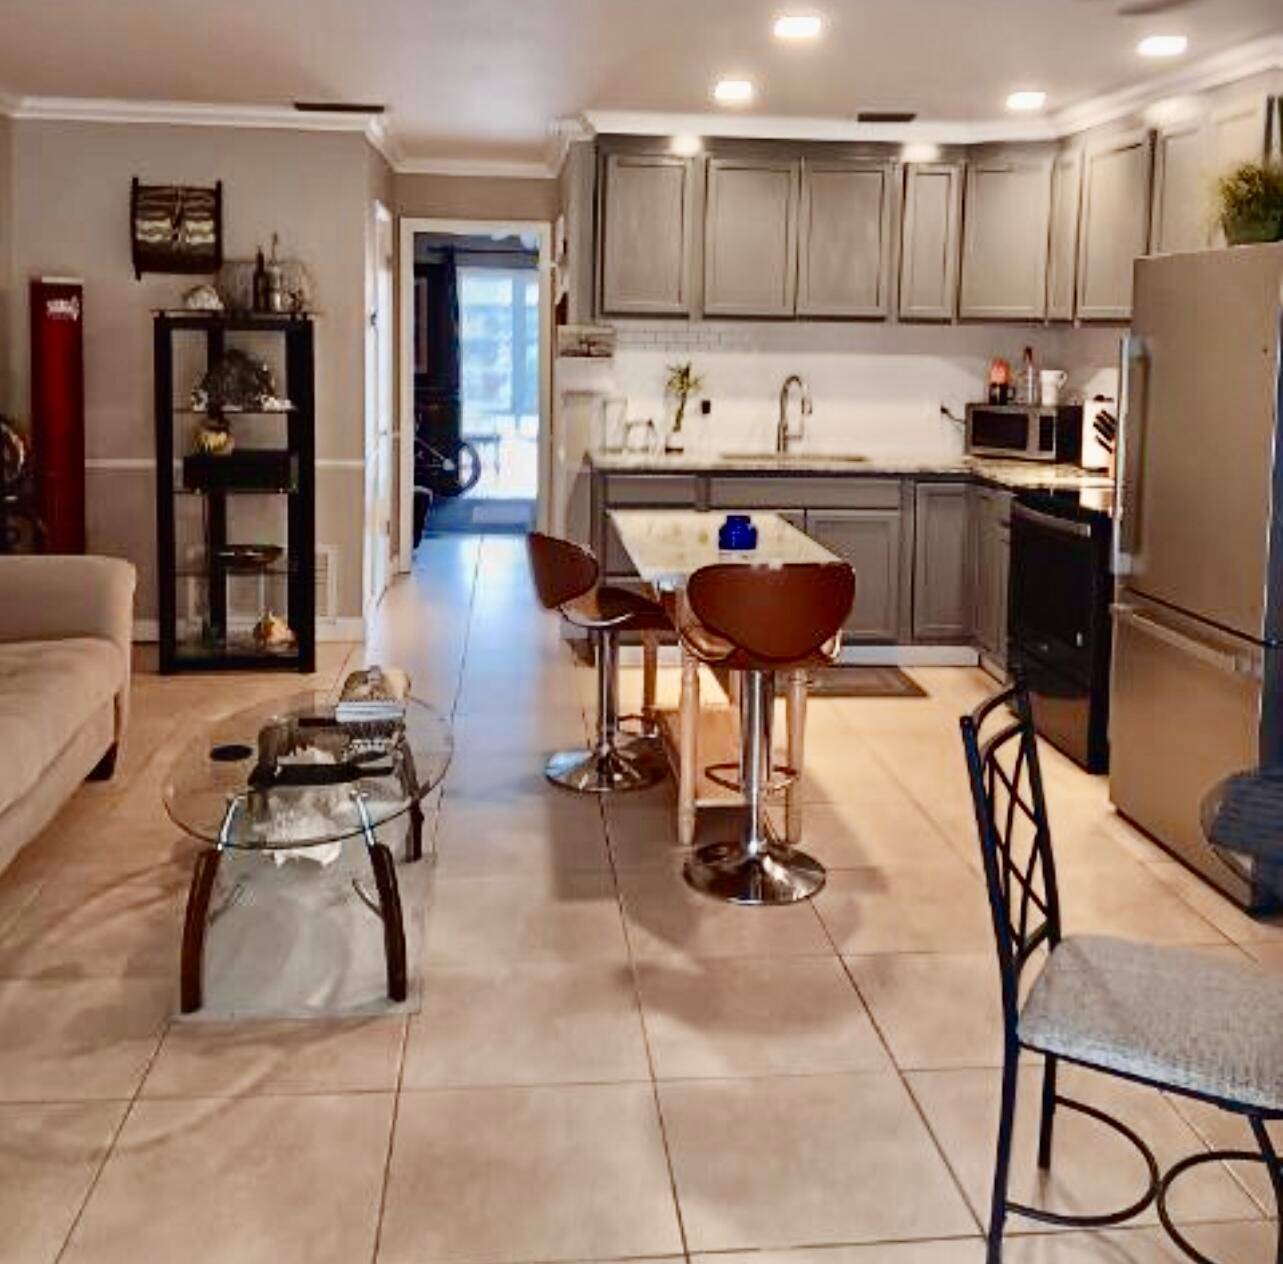 1 BEDROOM, 1 1 2 BATH REMODELED 2ND FLOOR CONDO WITH NEW KITCHEN TILED FLOORS THROUGHOUT.